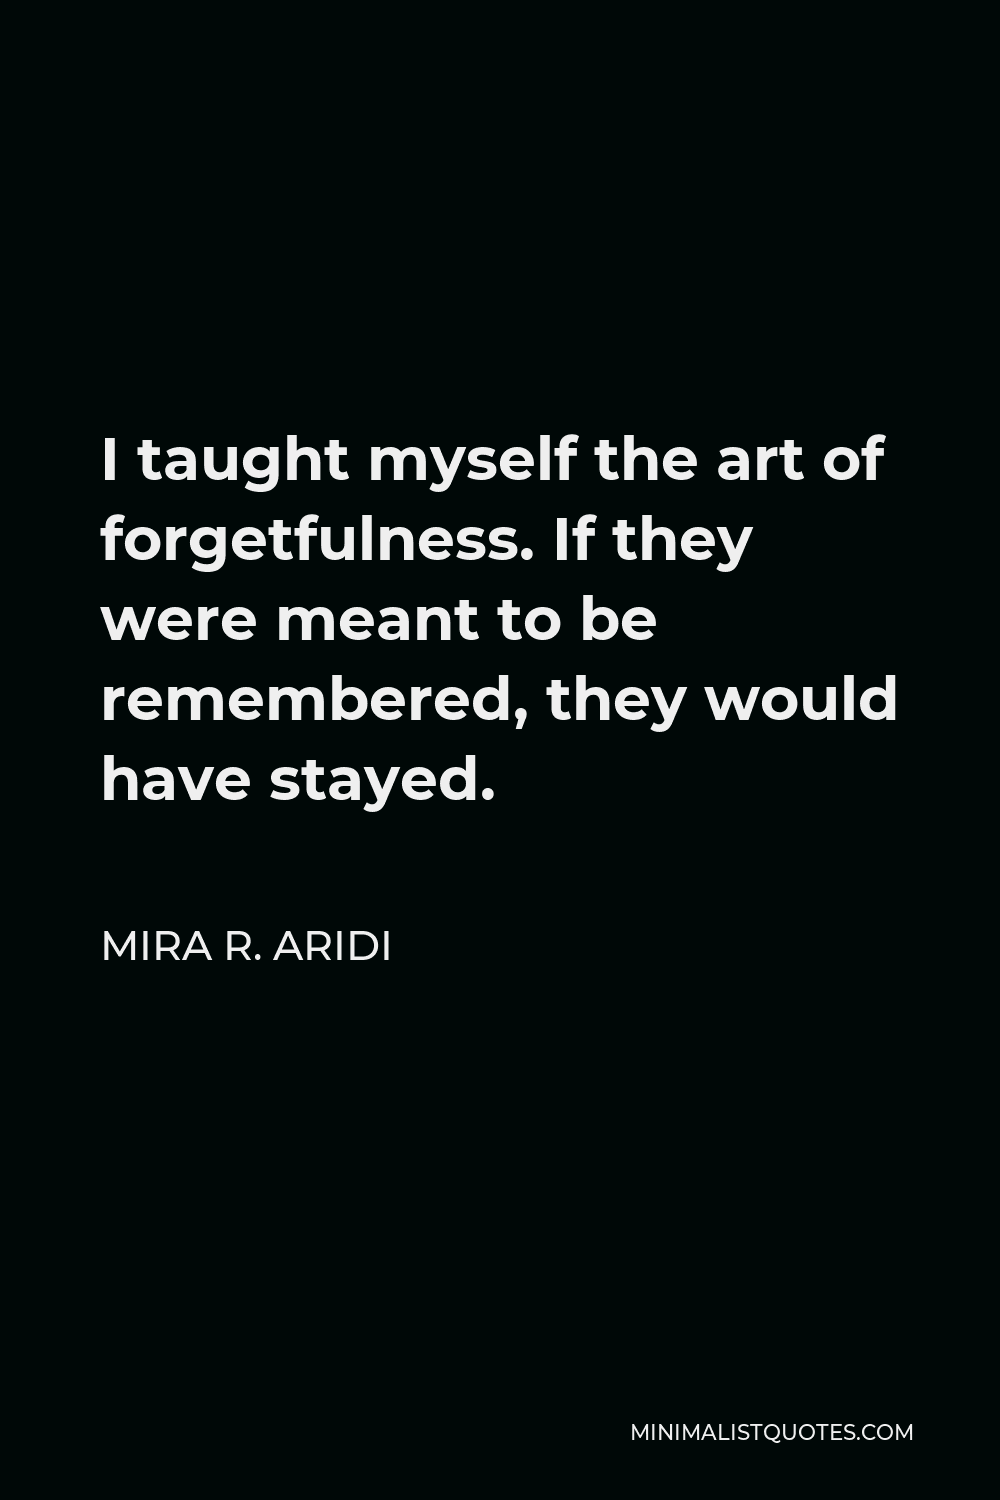 Mira R. Aridi Quote - I taught myself the art of forgetfulness. If they were meant to be remembered, they would have stayed.